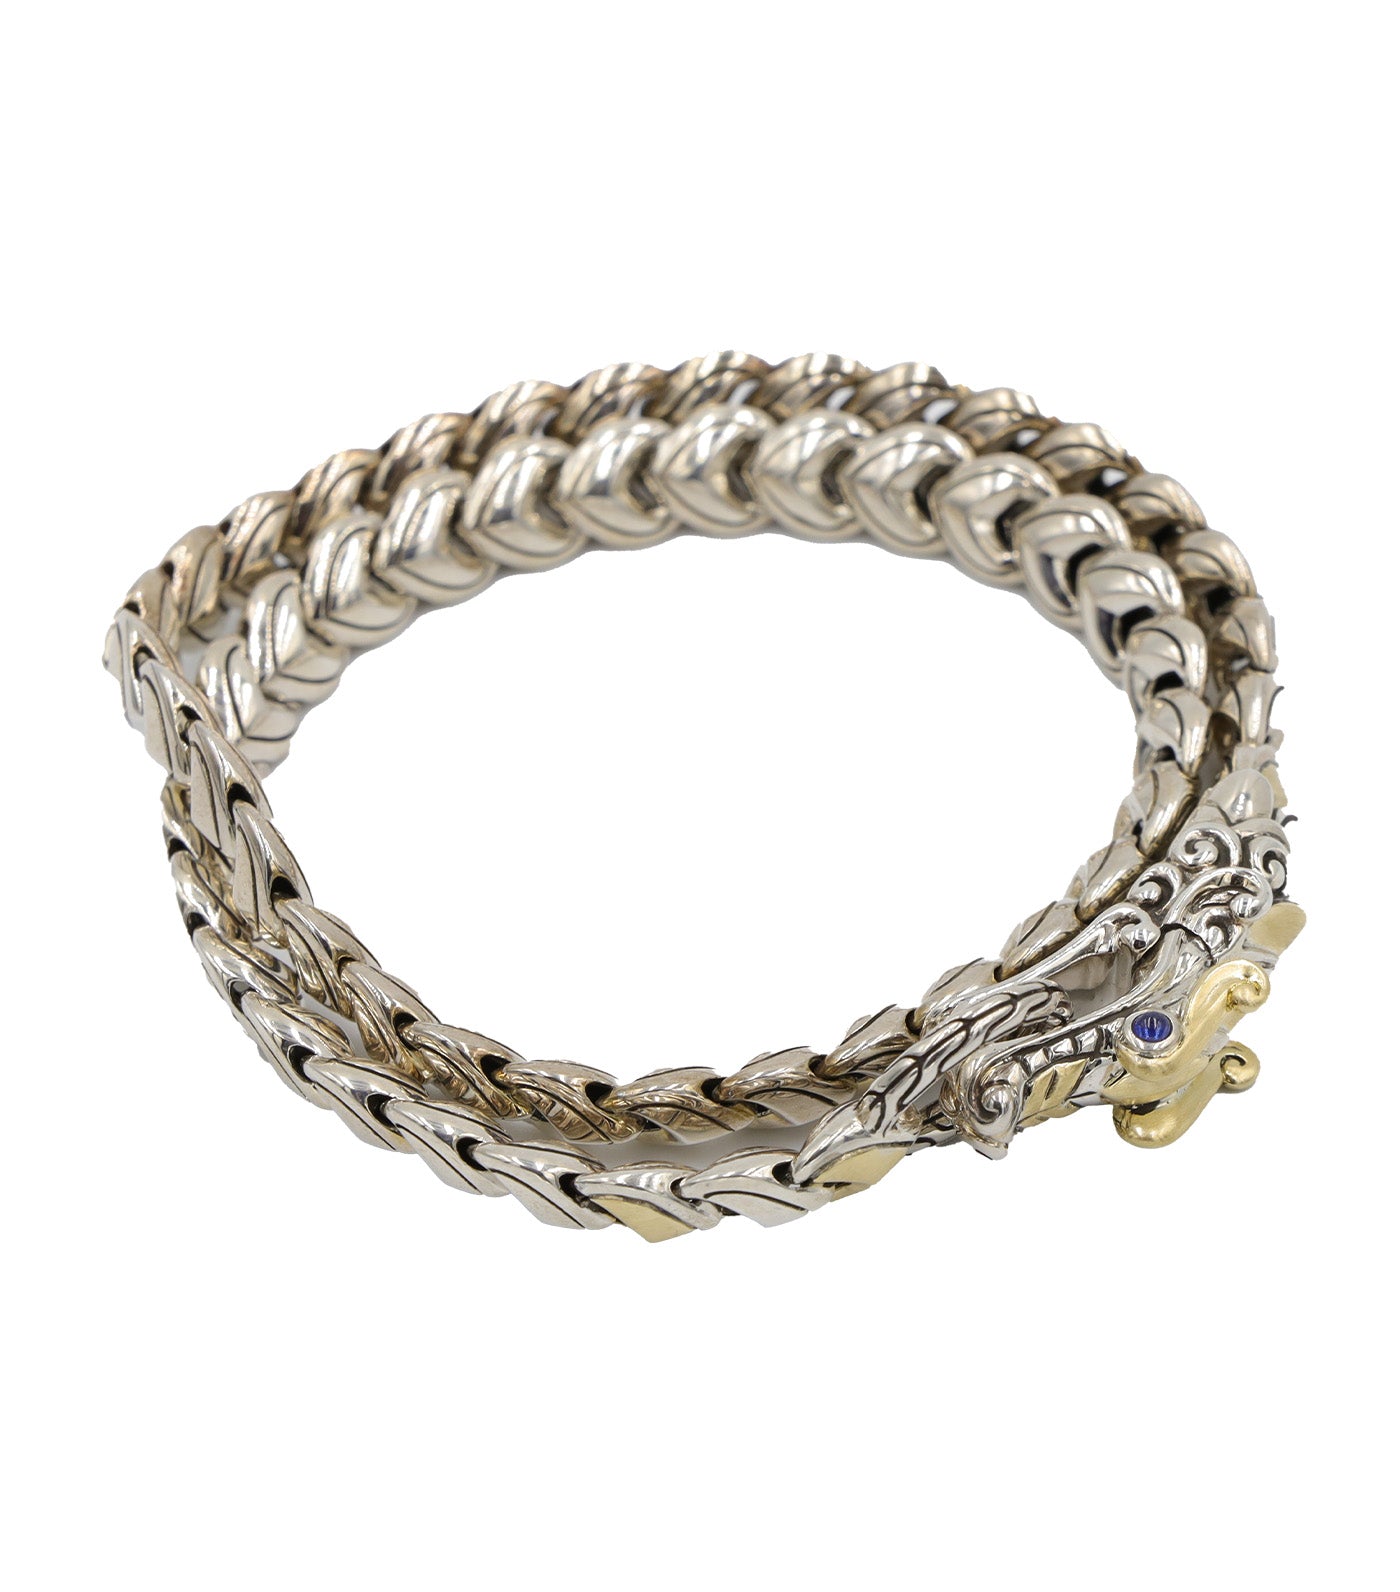 Legends Naga 18K Gold and Silver Double Wrap Bracelet with Blue Sapphire Eyes